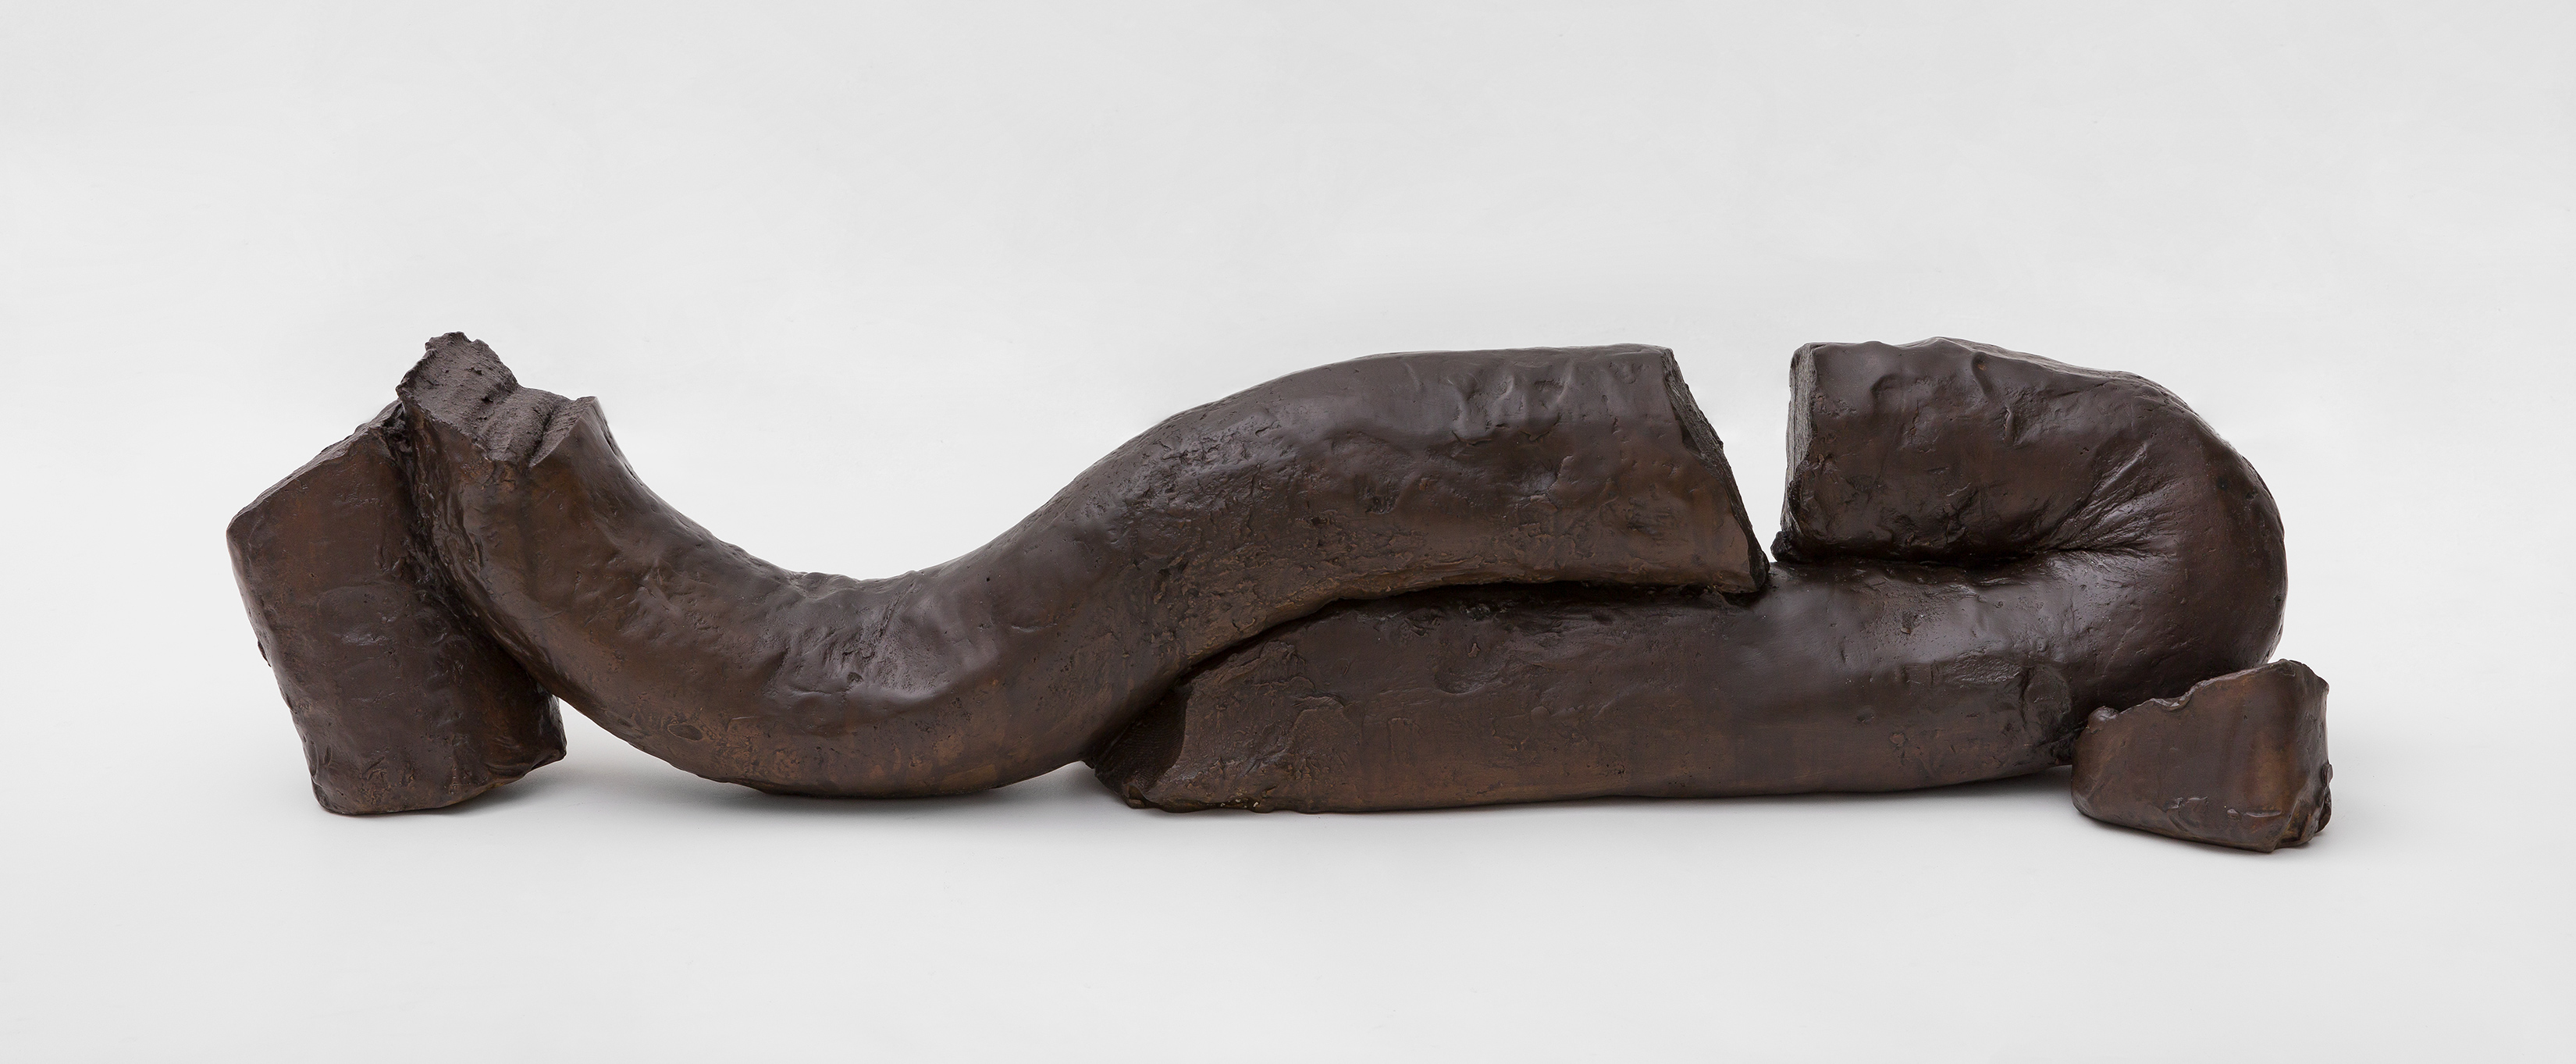 Side view of Paulo Monteiro's Untitled patinated bronze sculpture